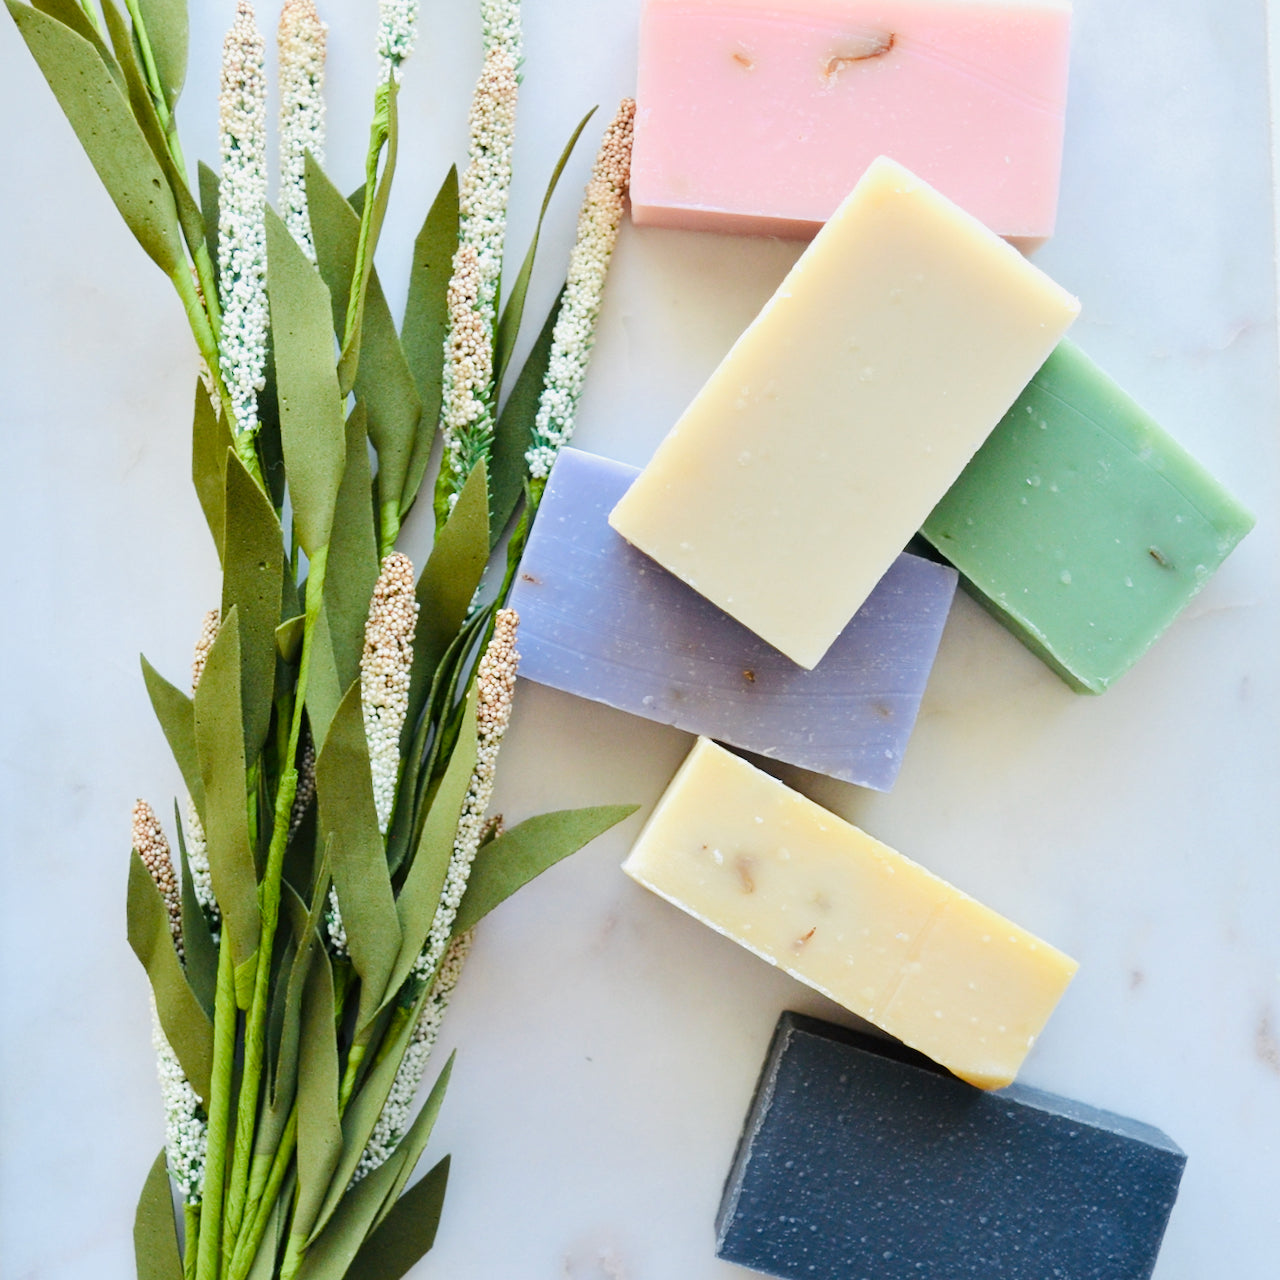 Unscented | Soap Bar | Lume